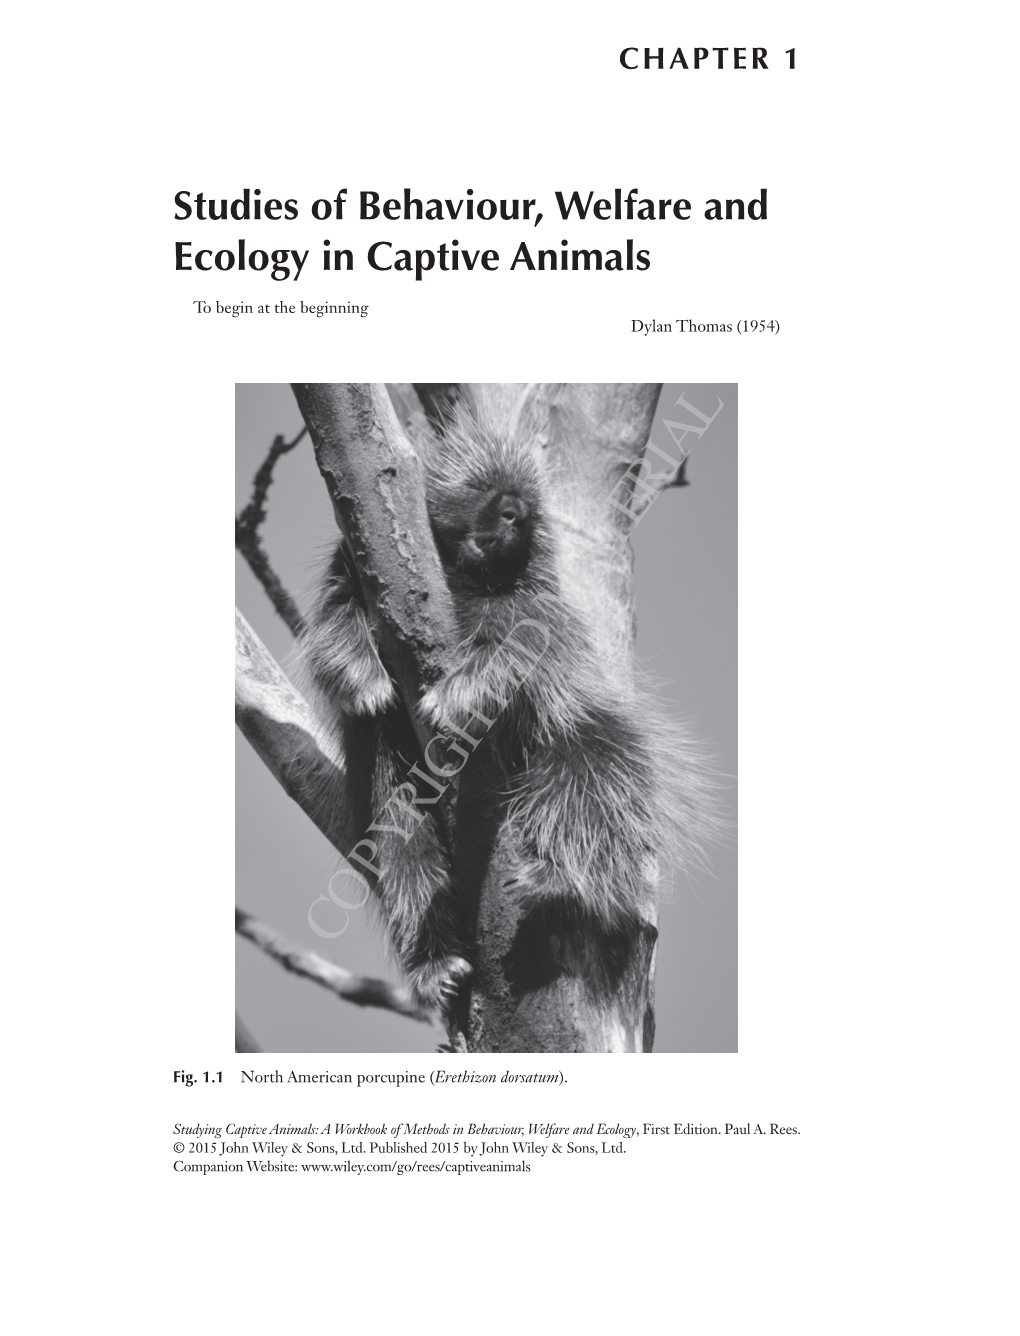 Studies of Behaviour, Welfare and Ecology in Captive Animals